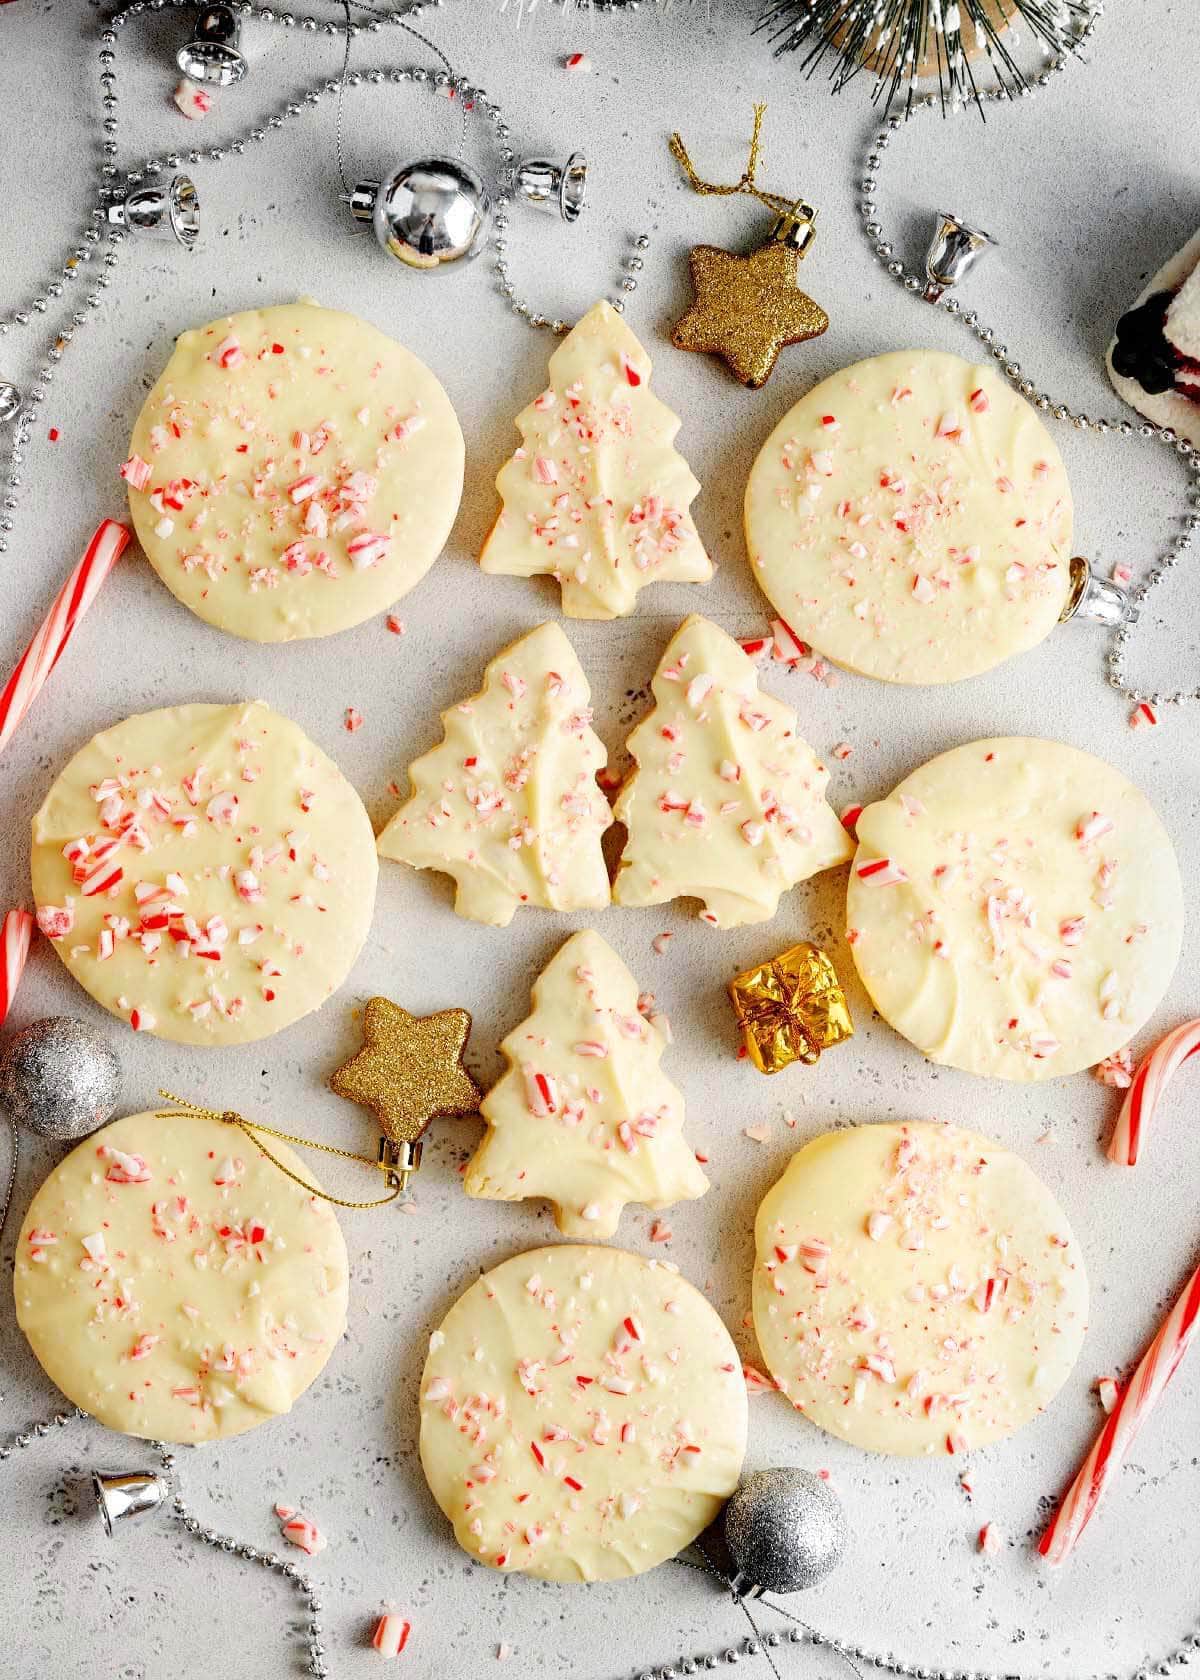 Christmas Cut-Out Sugar Cookies with decor and candy canes